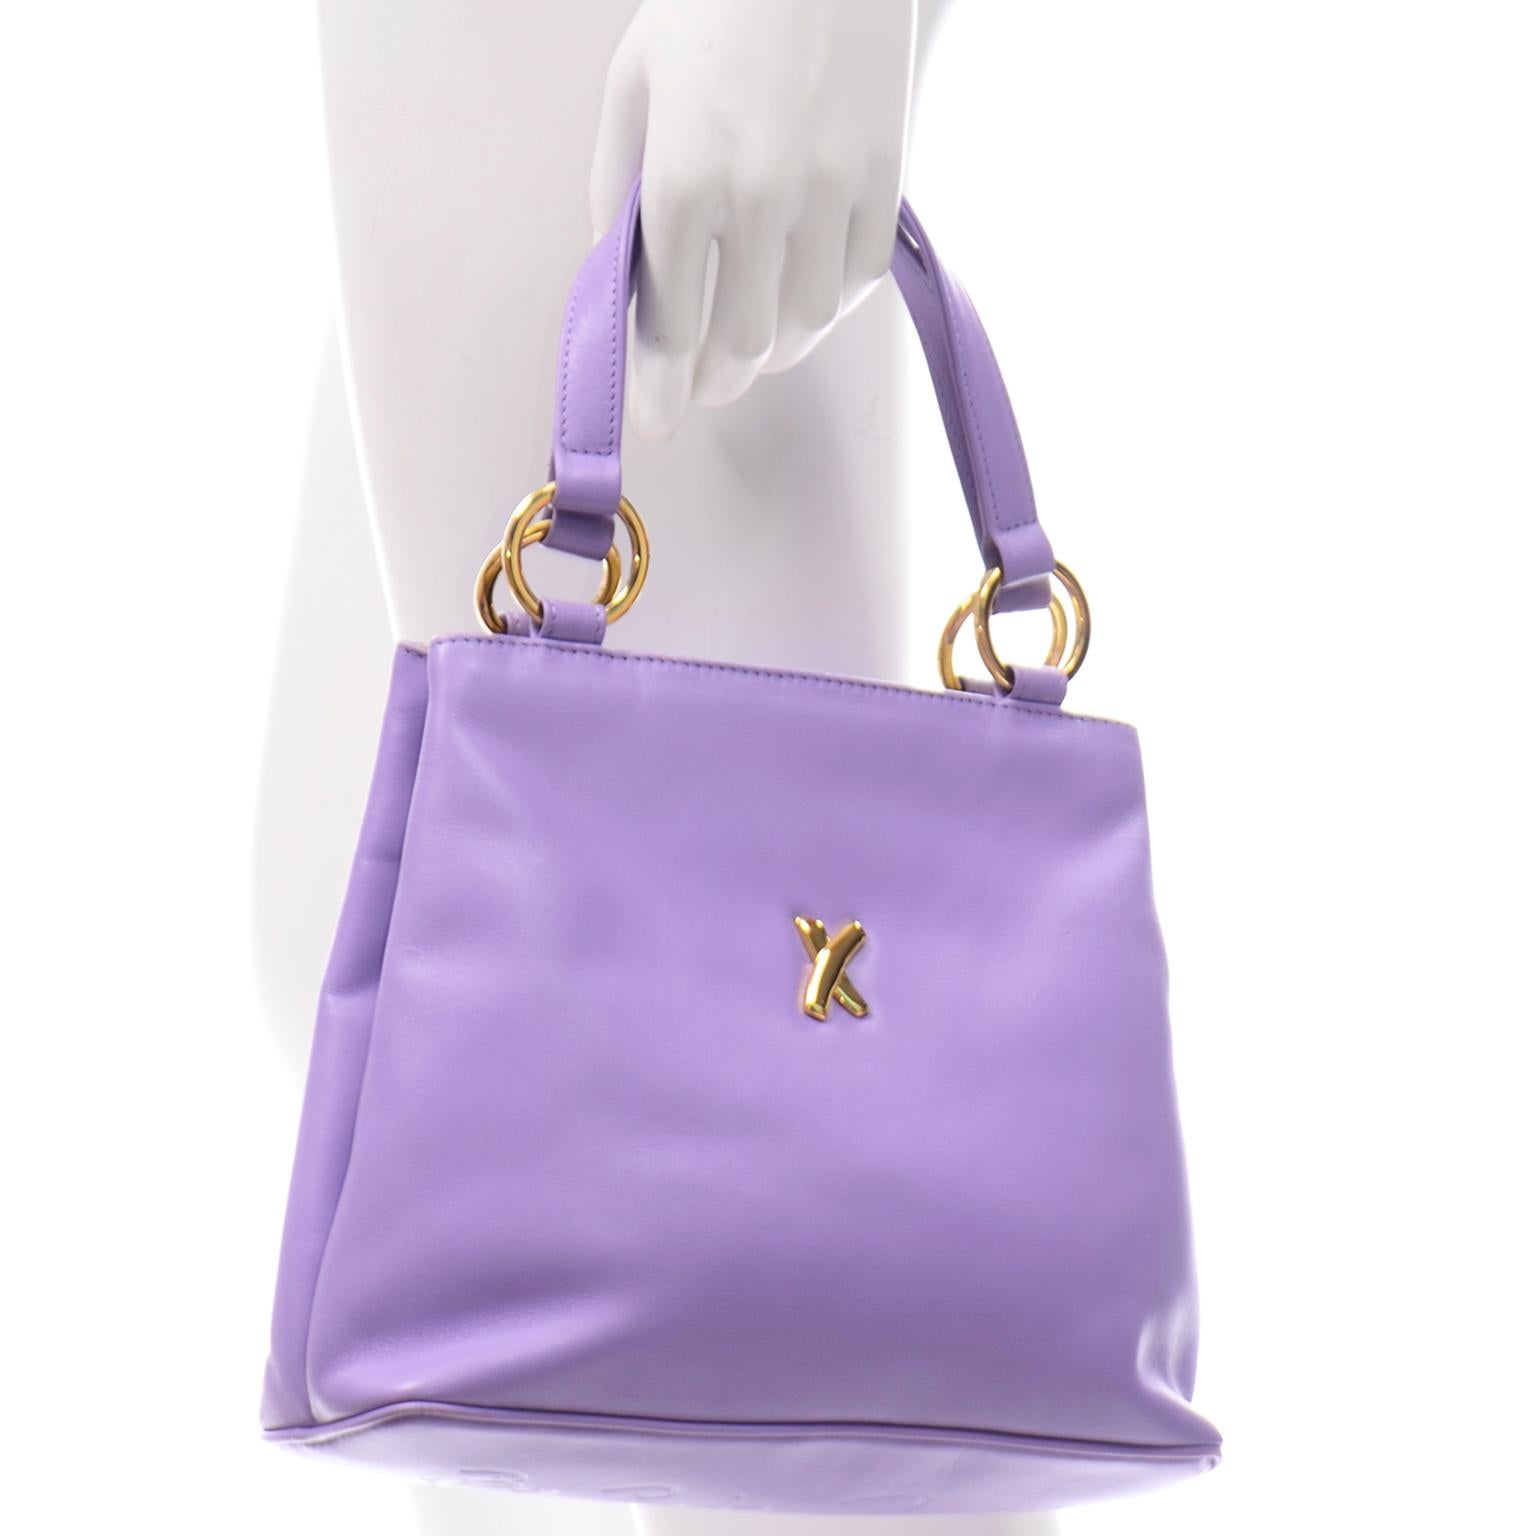 This is a perfect Spring and Summer vintage Paloma Picasso leather handbag! The bag is in a rare lavender purple and front of the handbag has the signature Paloma Picasso branded X hardware in a yellow gold tone. The bottom of the handbag has 